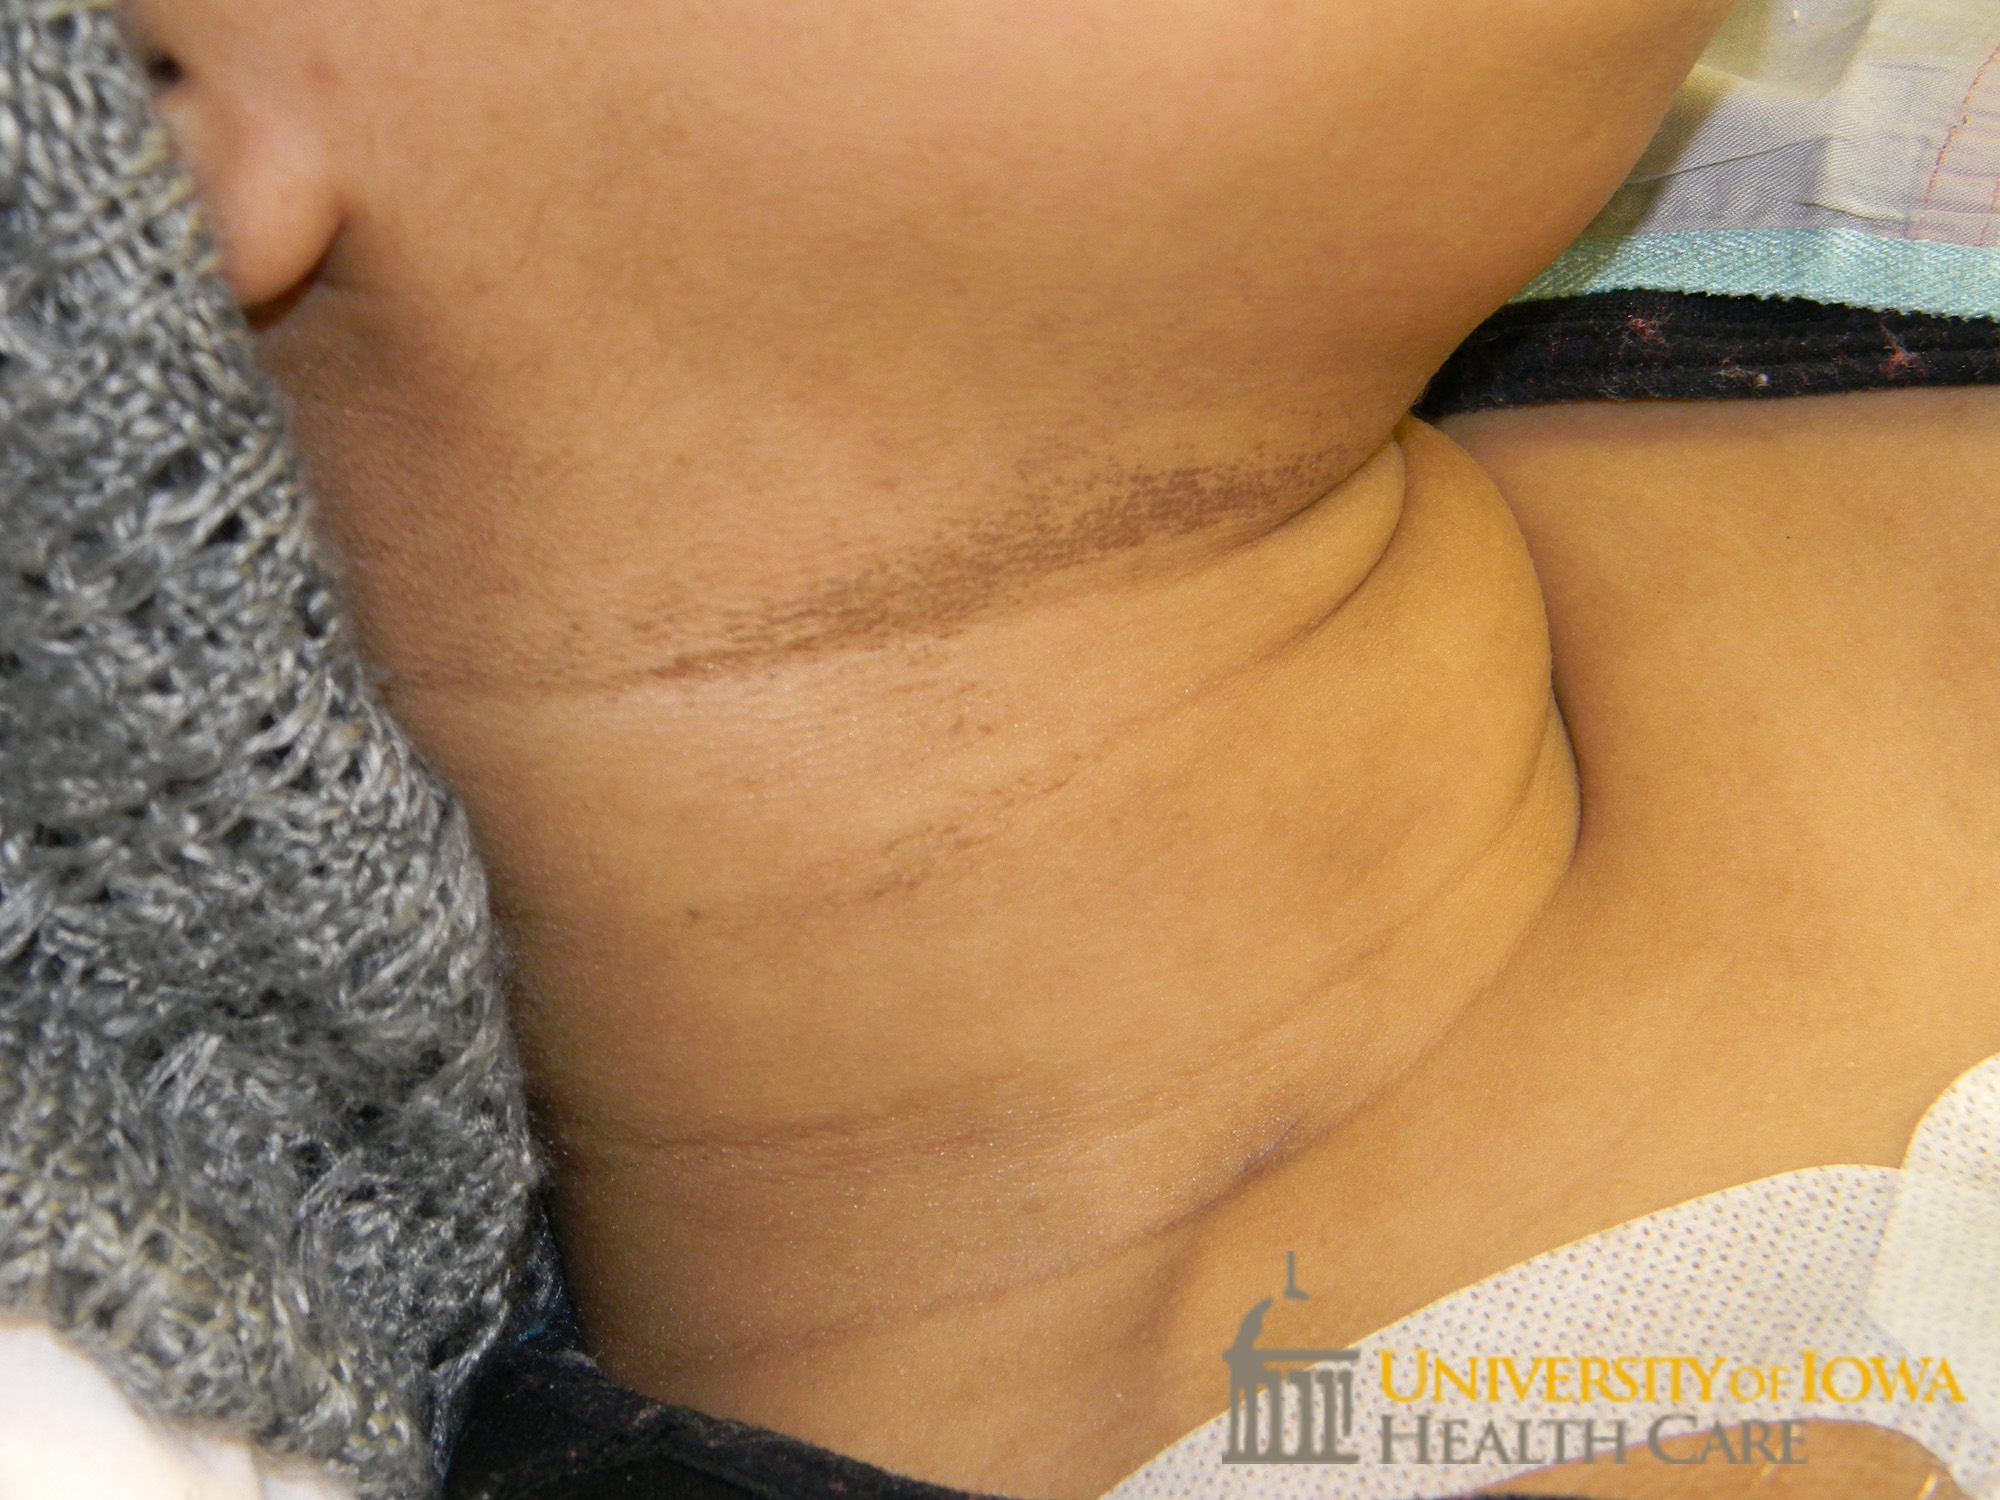 Brown macules coalescing into patches on the neck flexural folds. (click images for higher resolution).